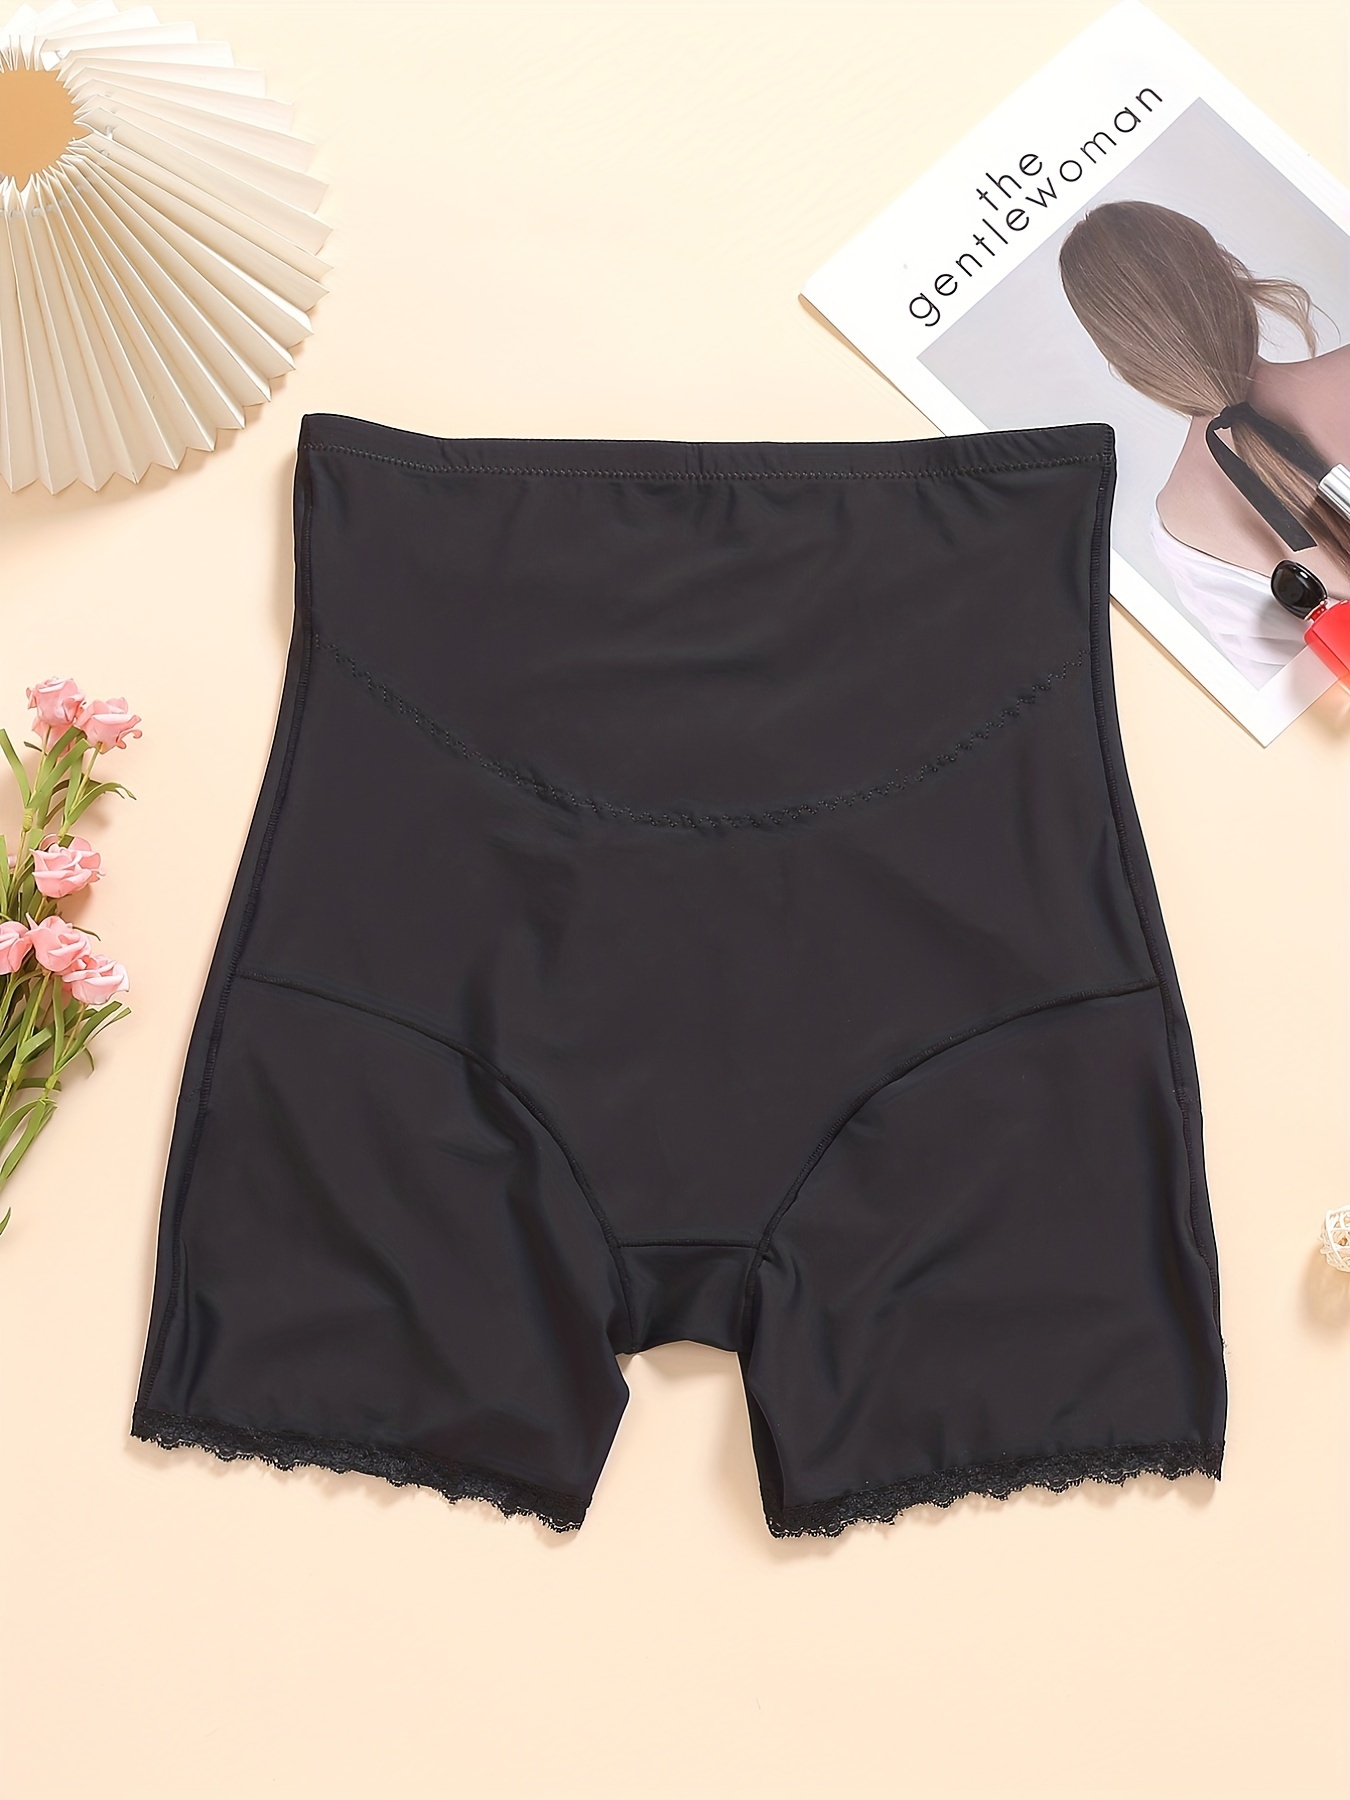 Plus Size Women High Waist Slimming Tummy Control Knickers Pant